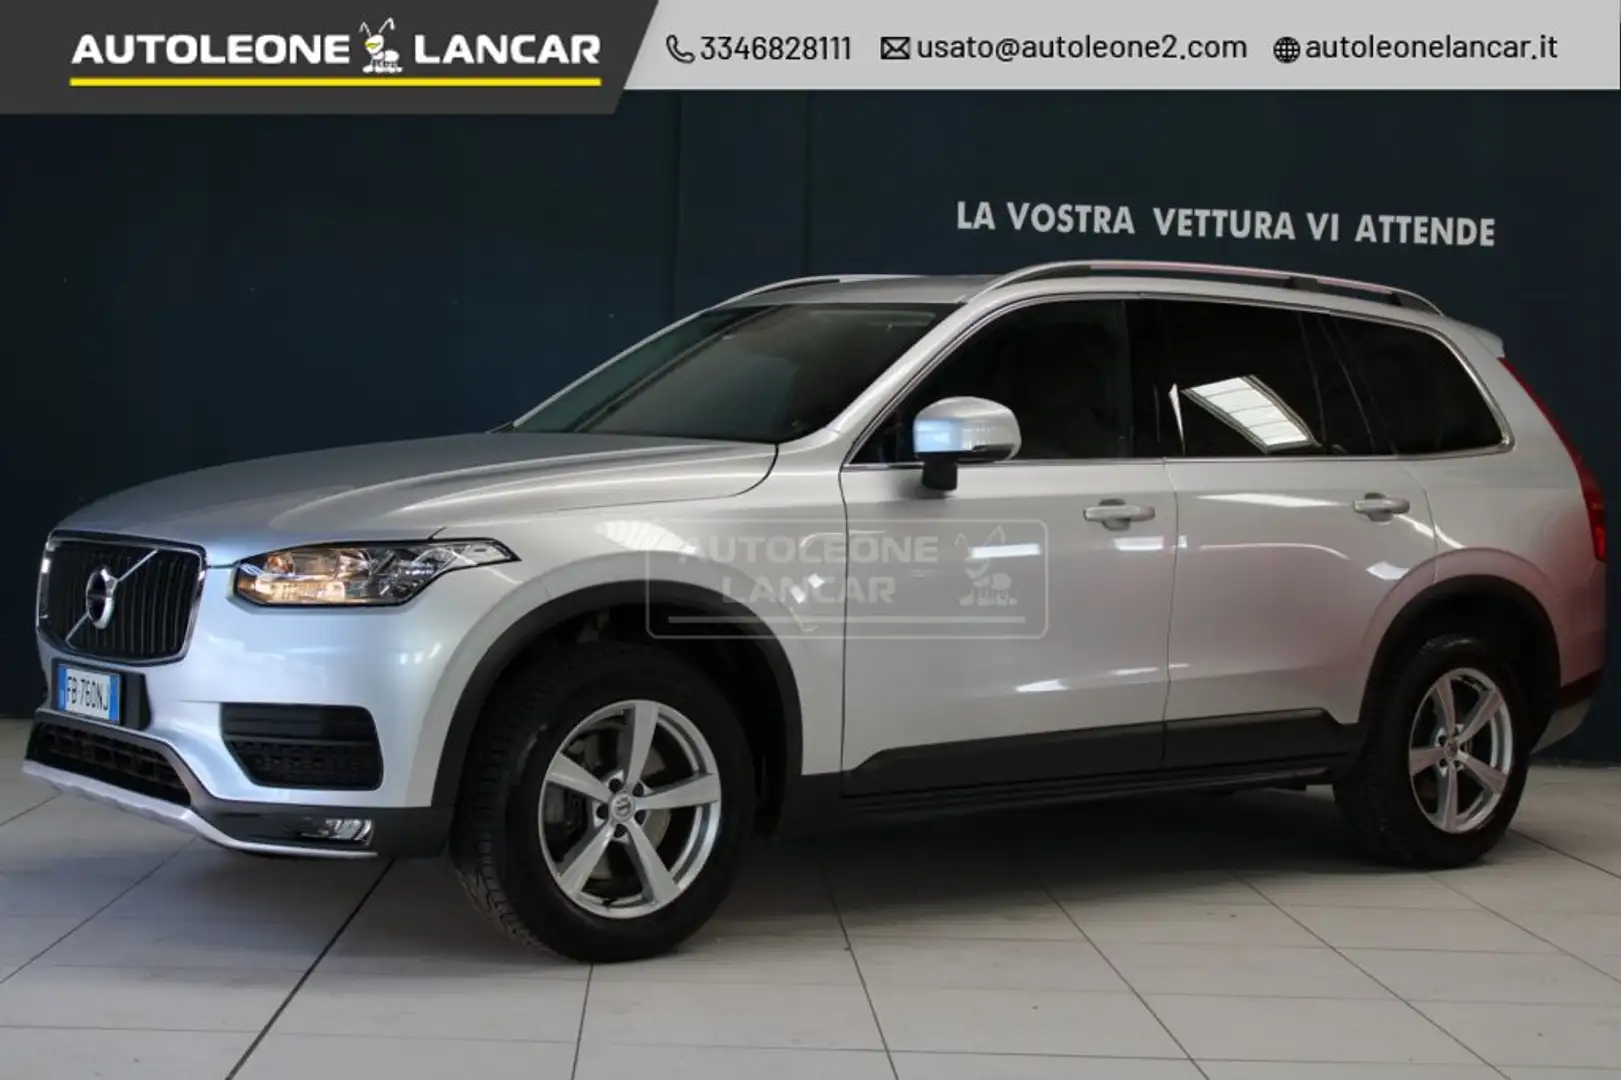 Volvo XC90 2.0 d5 Kinetic awd geartronic 225cv AUTOMATICA 4x4 siva - 1